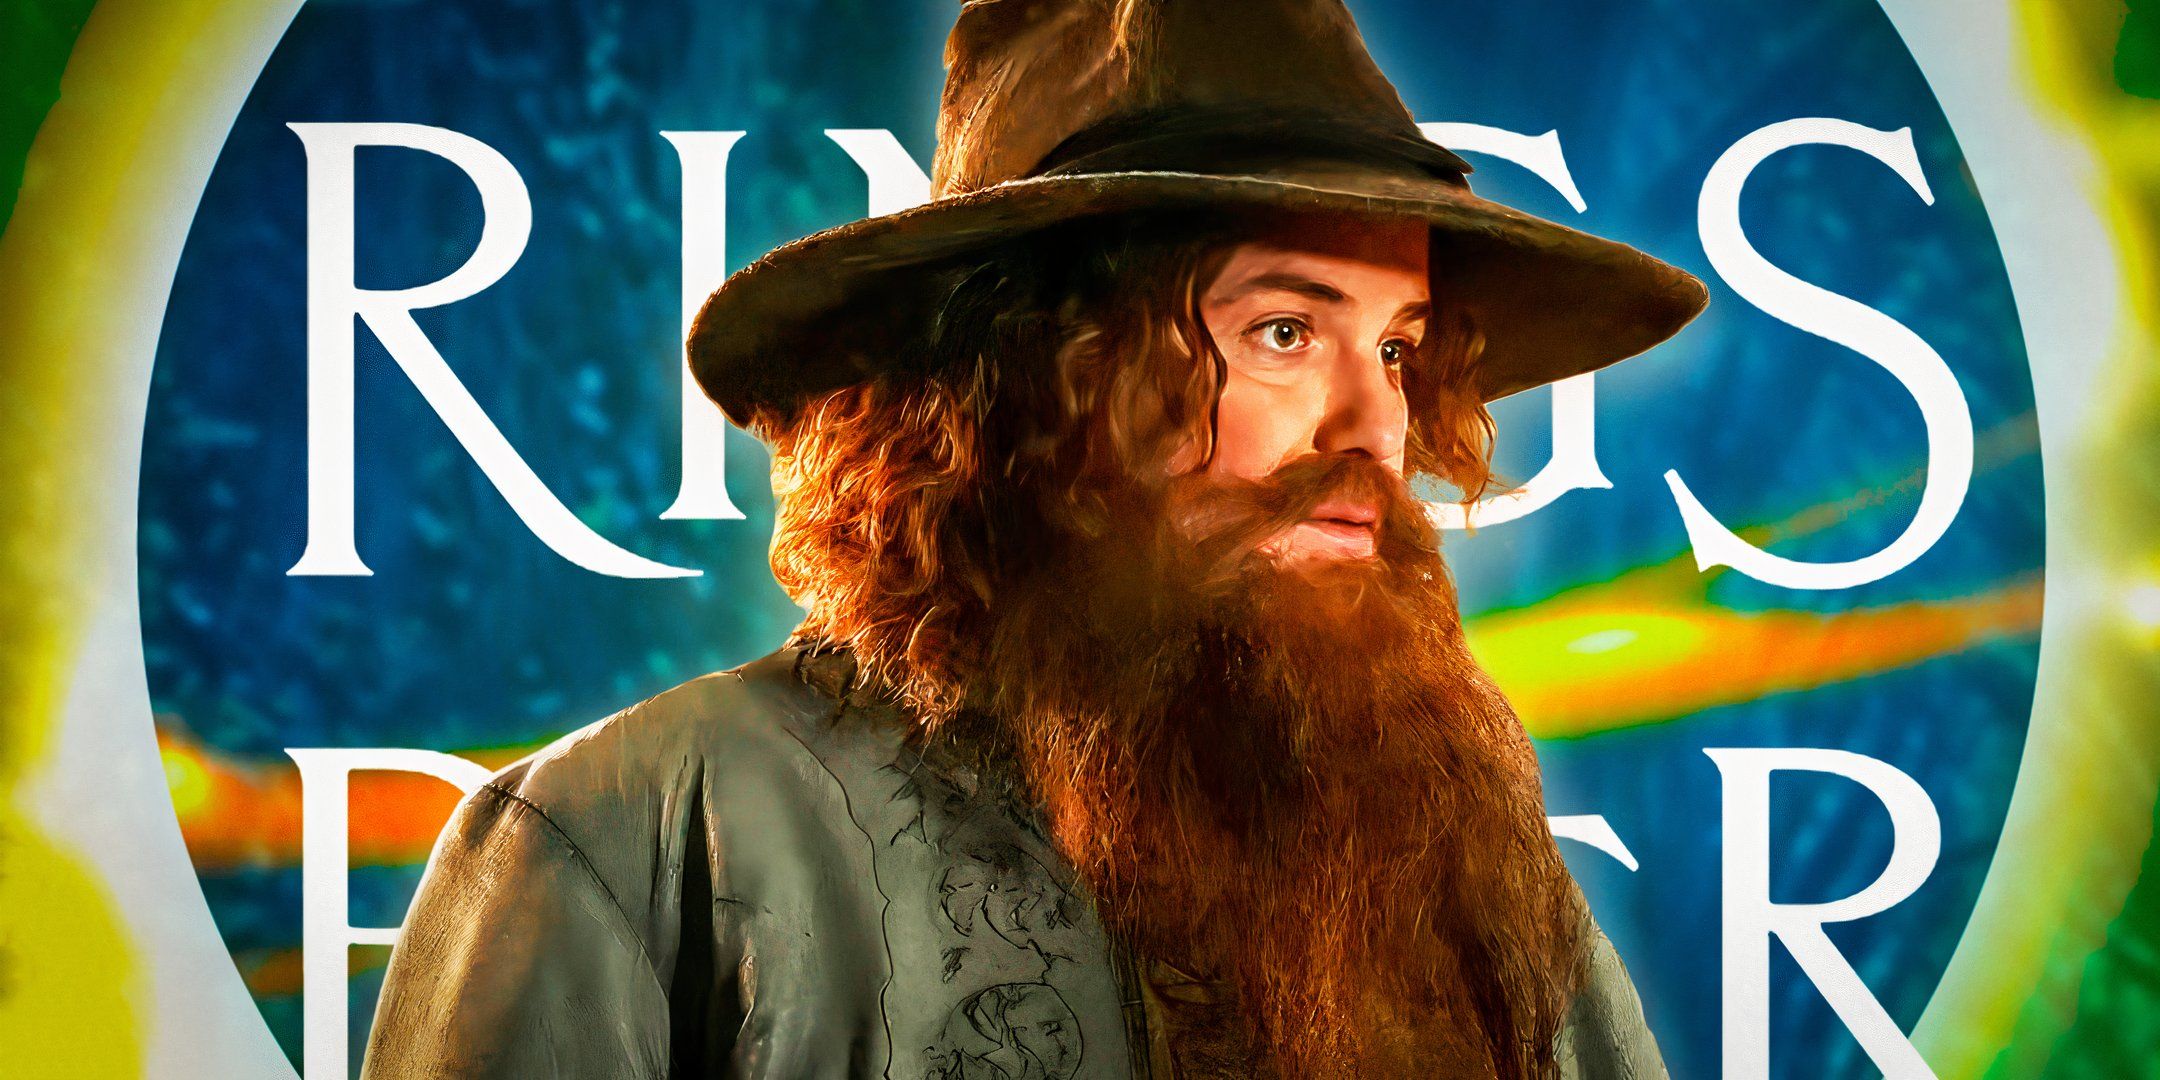 Tom Bombadil in The Lord of the Rings: The Rings of Power season 1 against a background containing The Rings of Power logo.